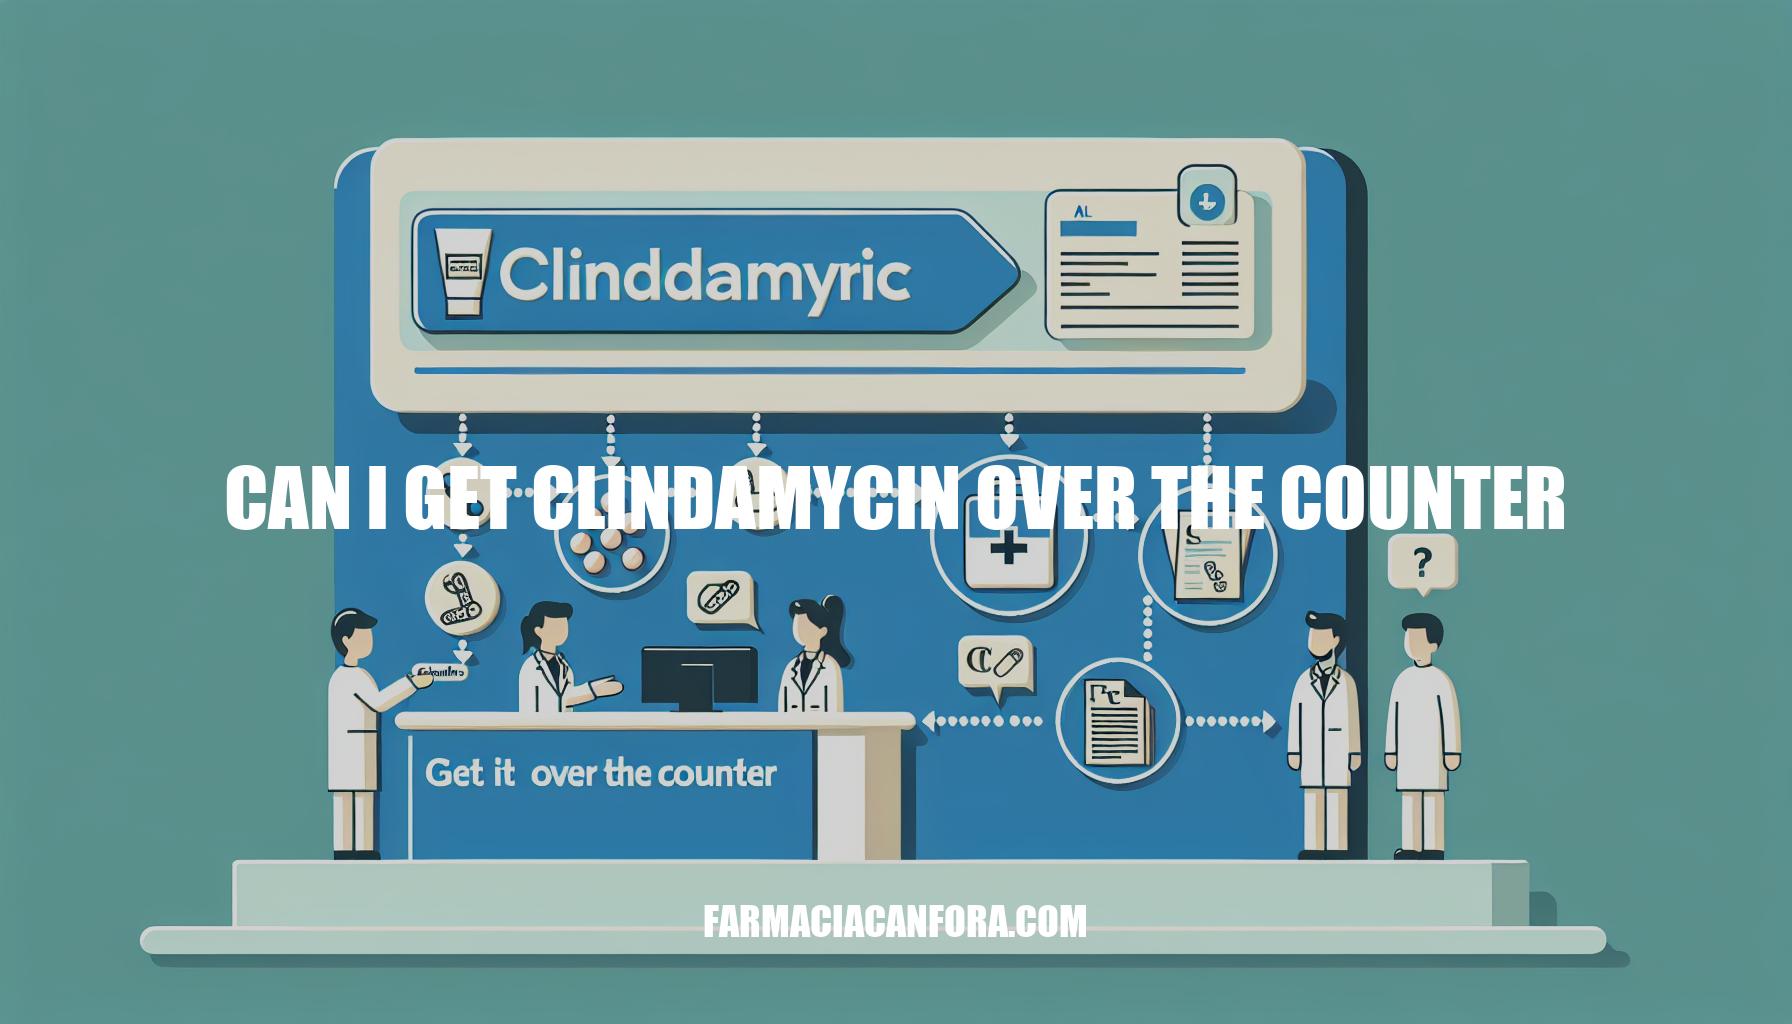 Getting Clindamycin Over the Counter: What You Need to Know